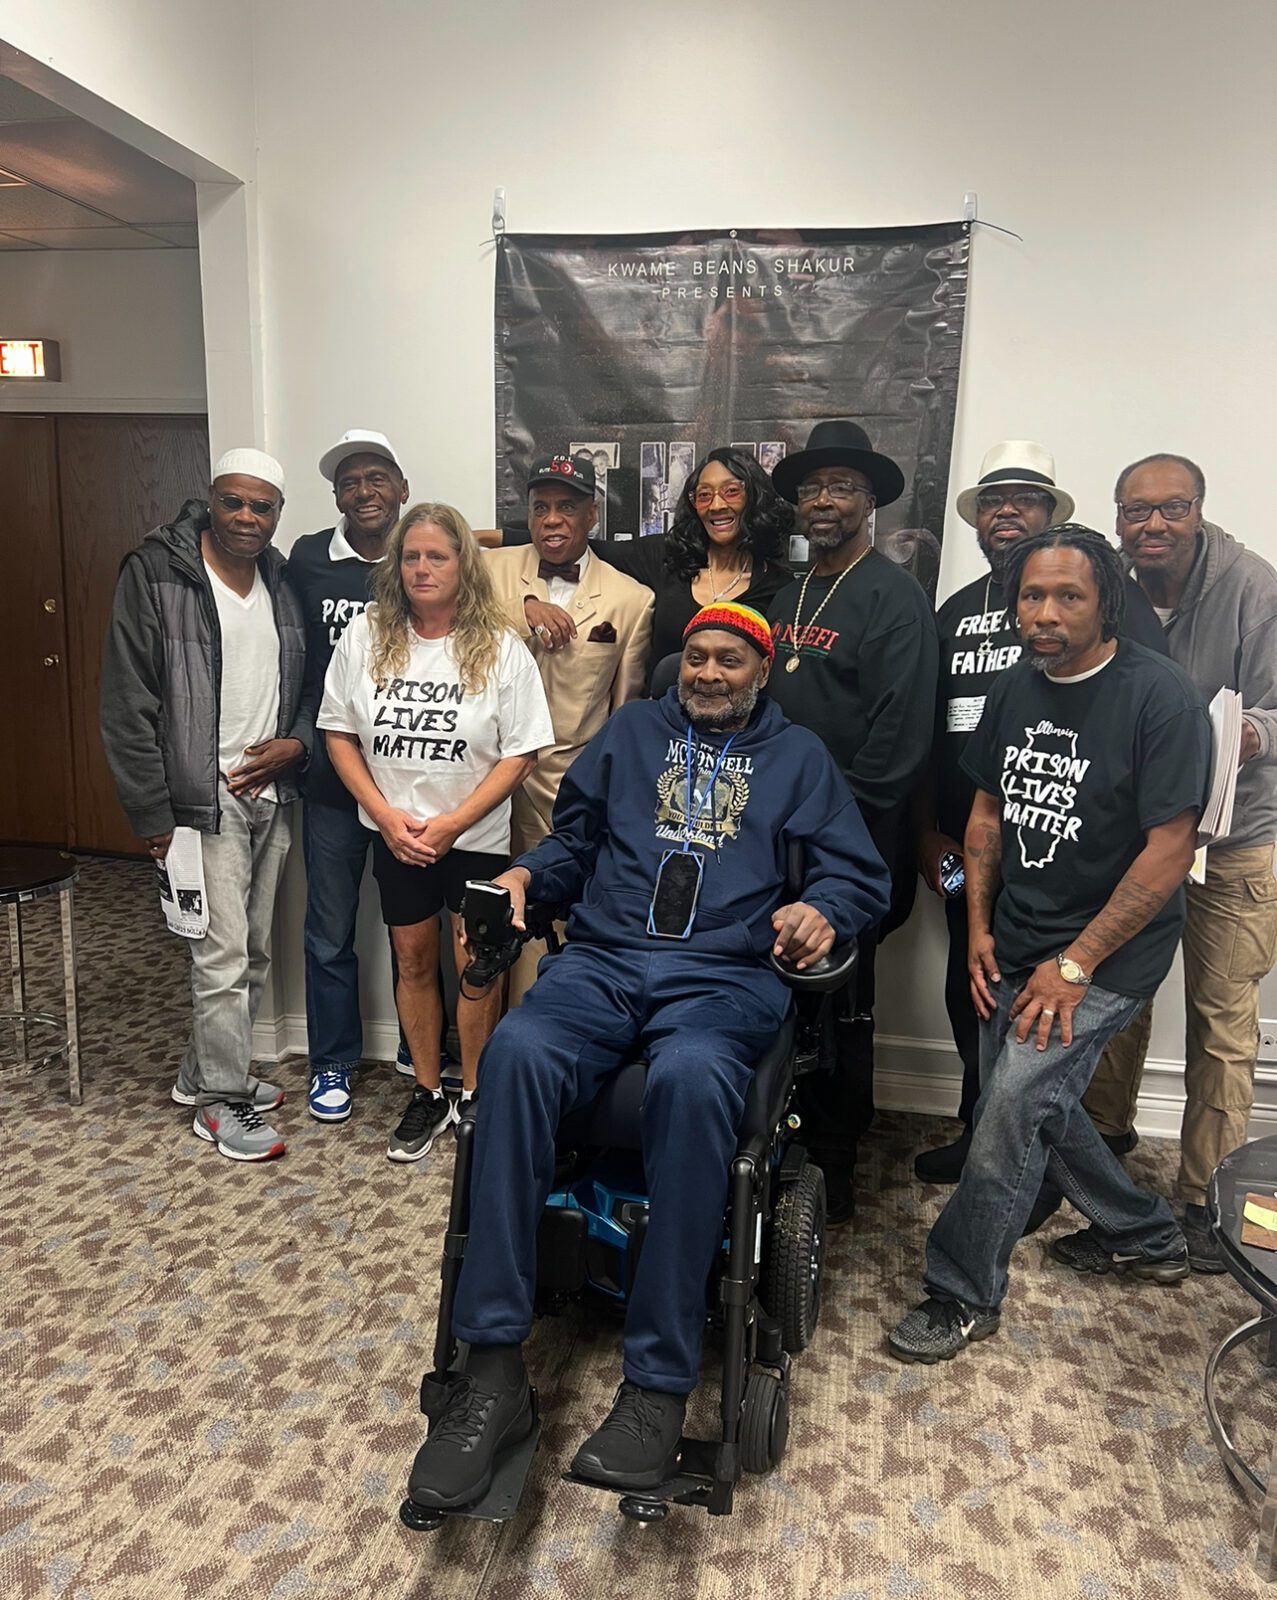 prison-lives-matter-liberate-our-elders-webinar-chicago-panel-scaled, Kwame ‘Beans’ Shakur: Call to Action for National Unification, World News & Views 